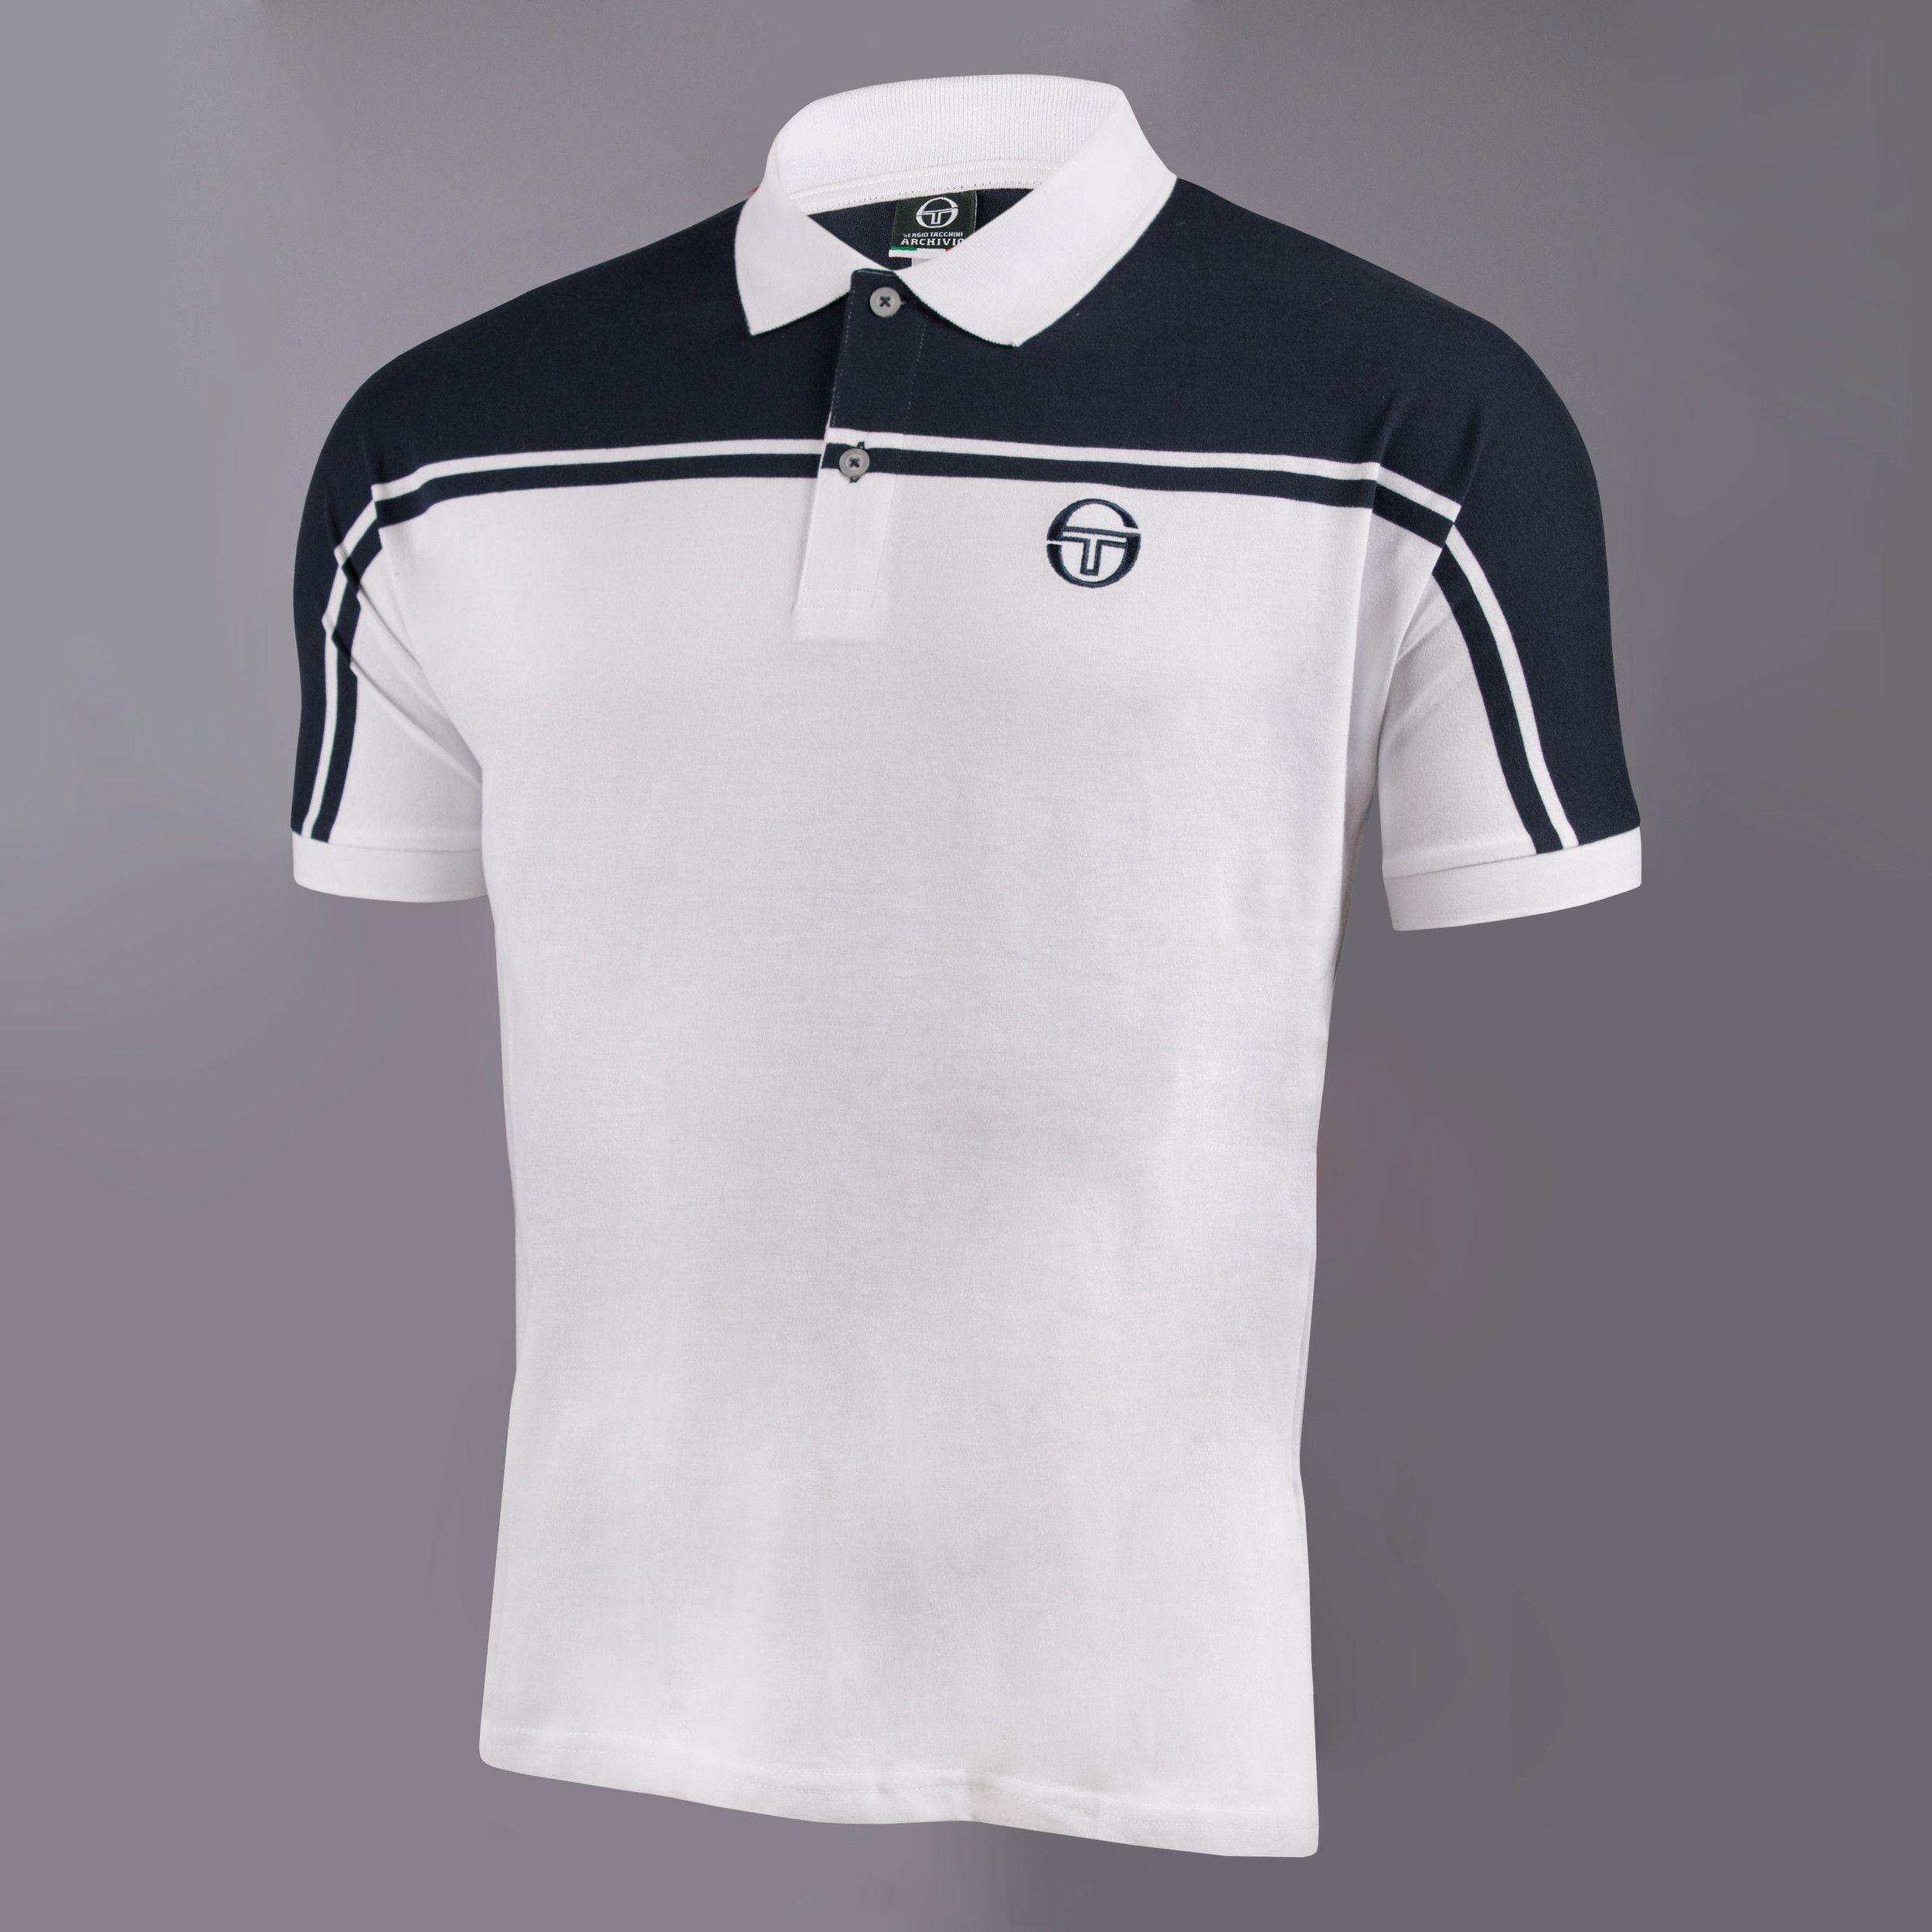 Blue and White Sports Logo - Sergio Tacchini Mens New Young Line Archivio Tennis Polo Navy Blue ...